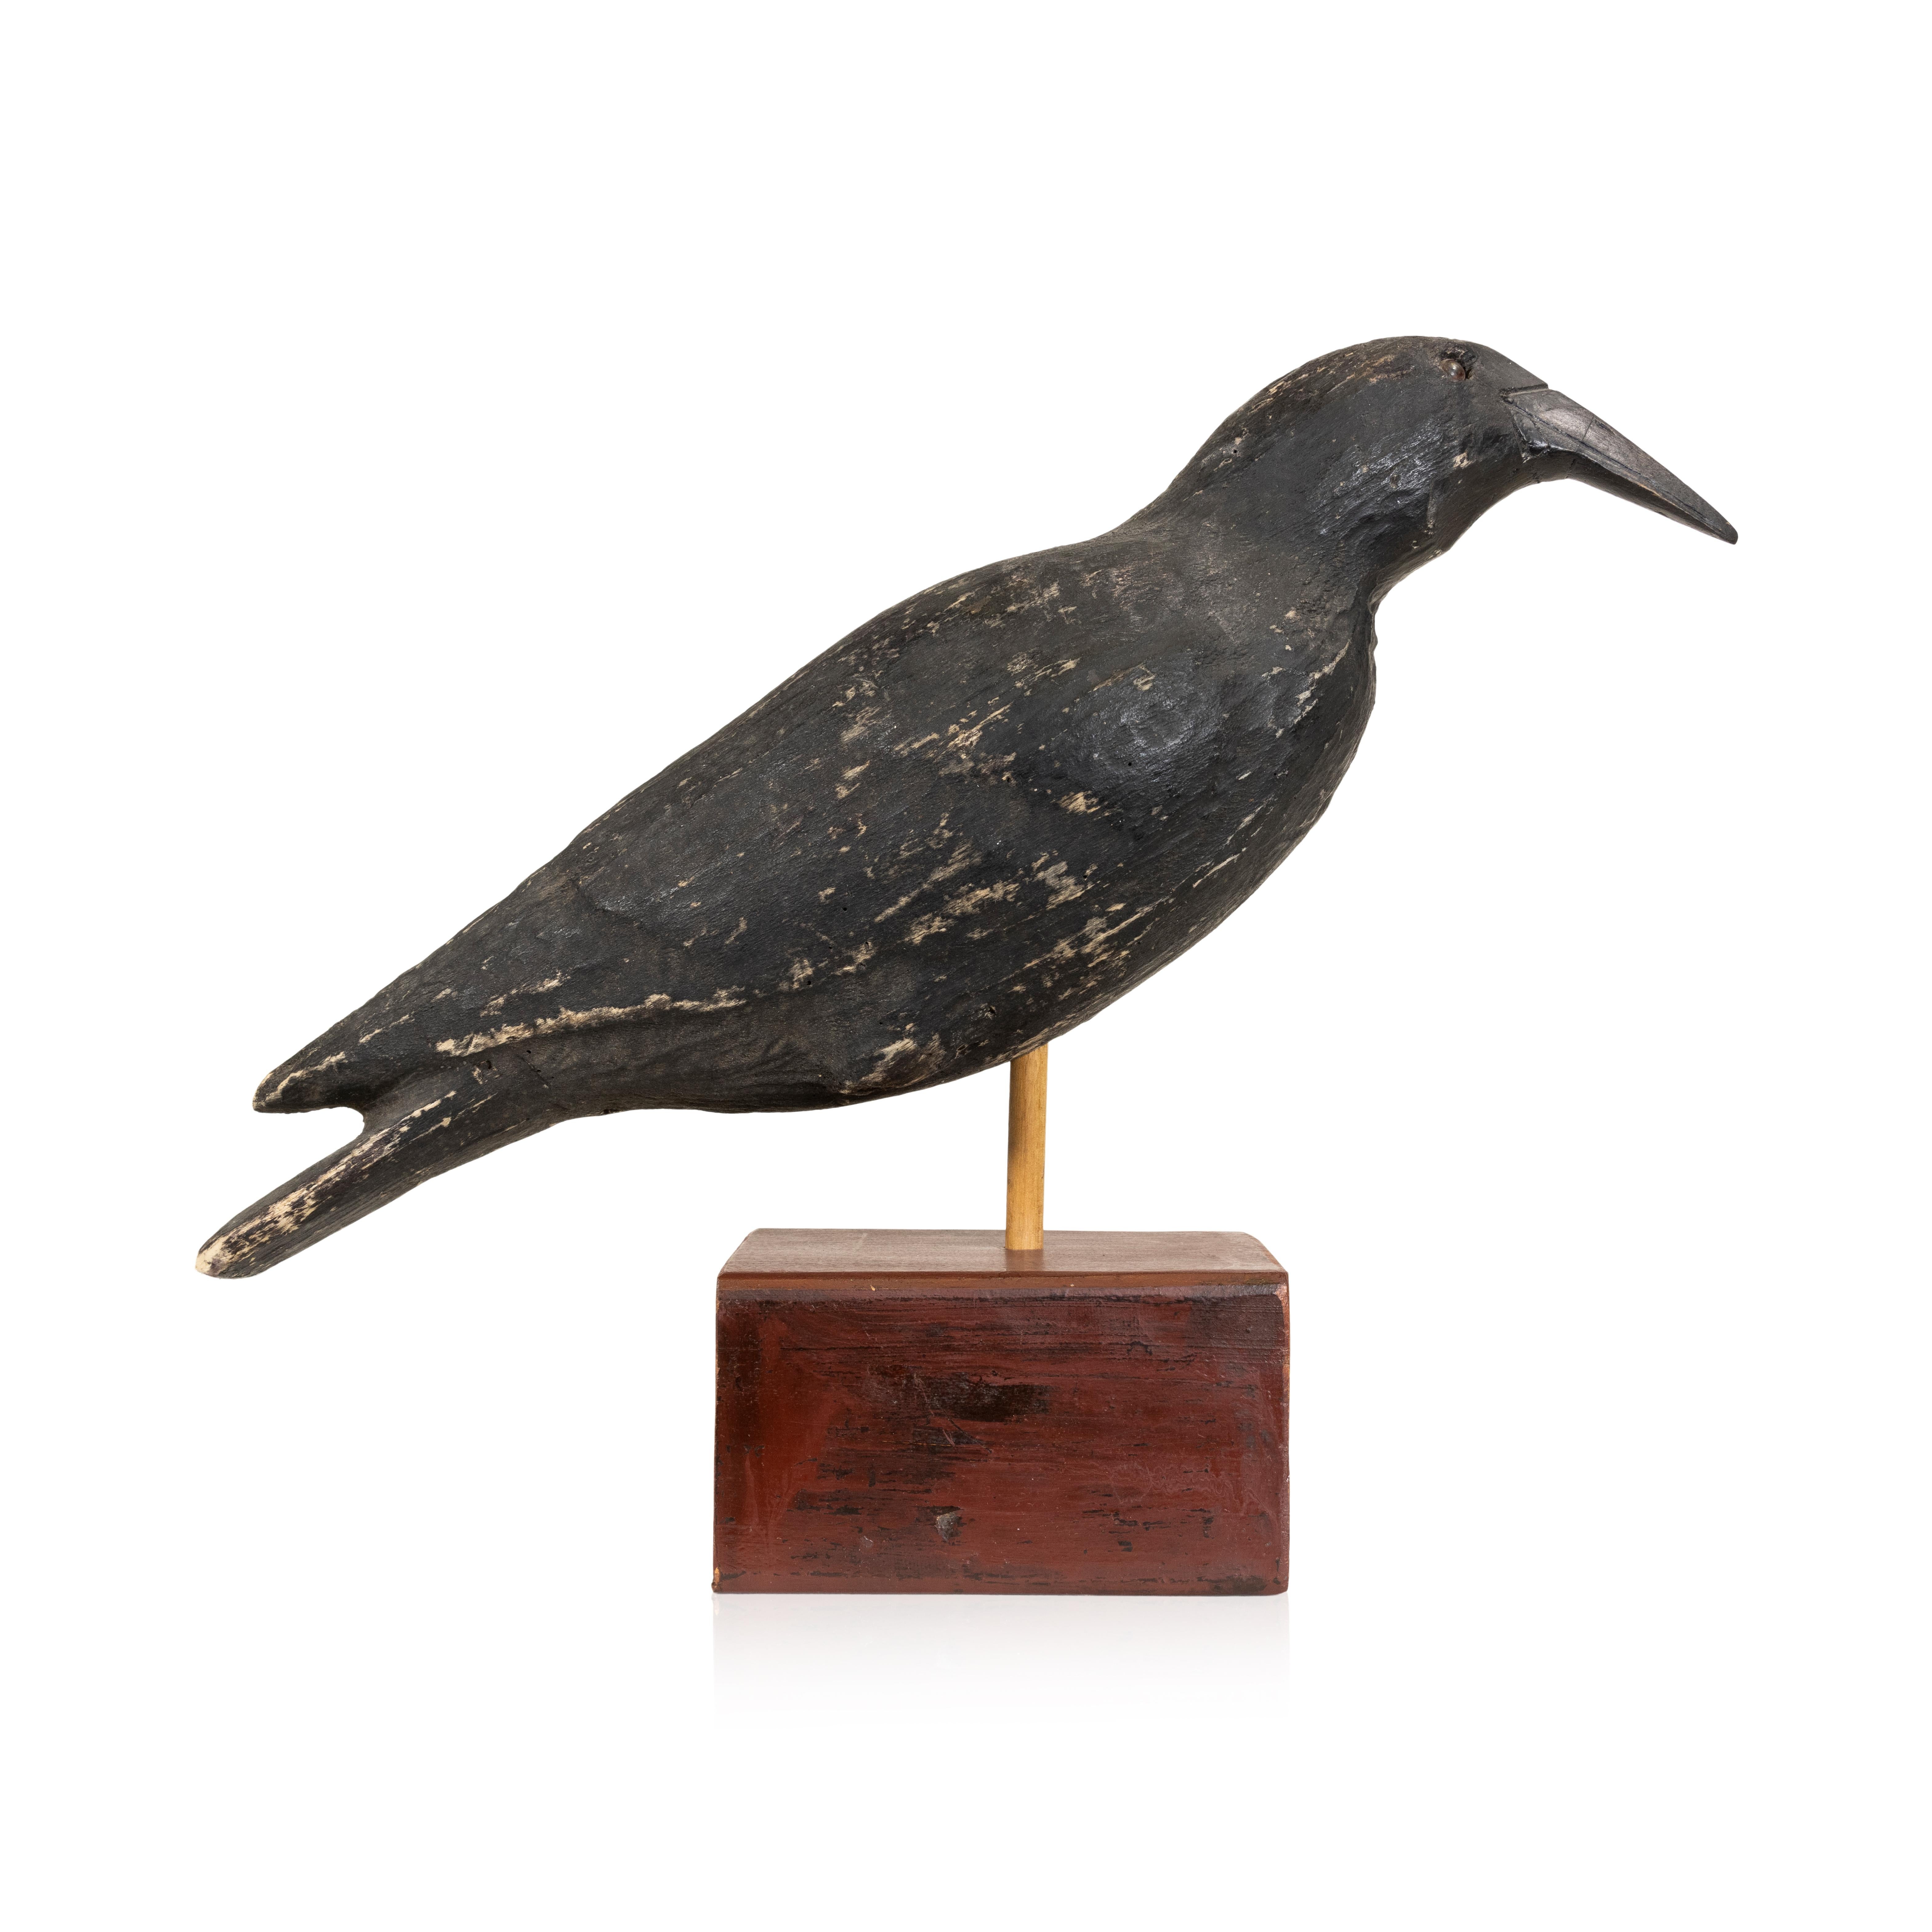 20th Century Crow decoy. Crow decoy mounted on modern base. Balsa wood, glass eyes. Life size, with base.

Period: 20th century
Origin: United States
Size:  16